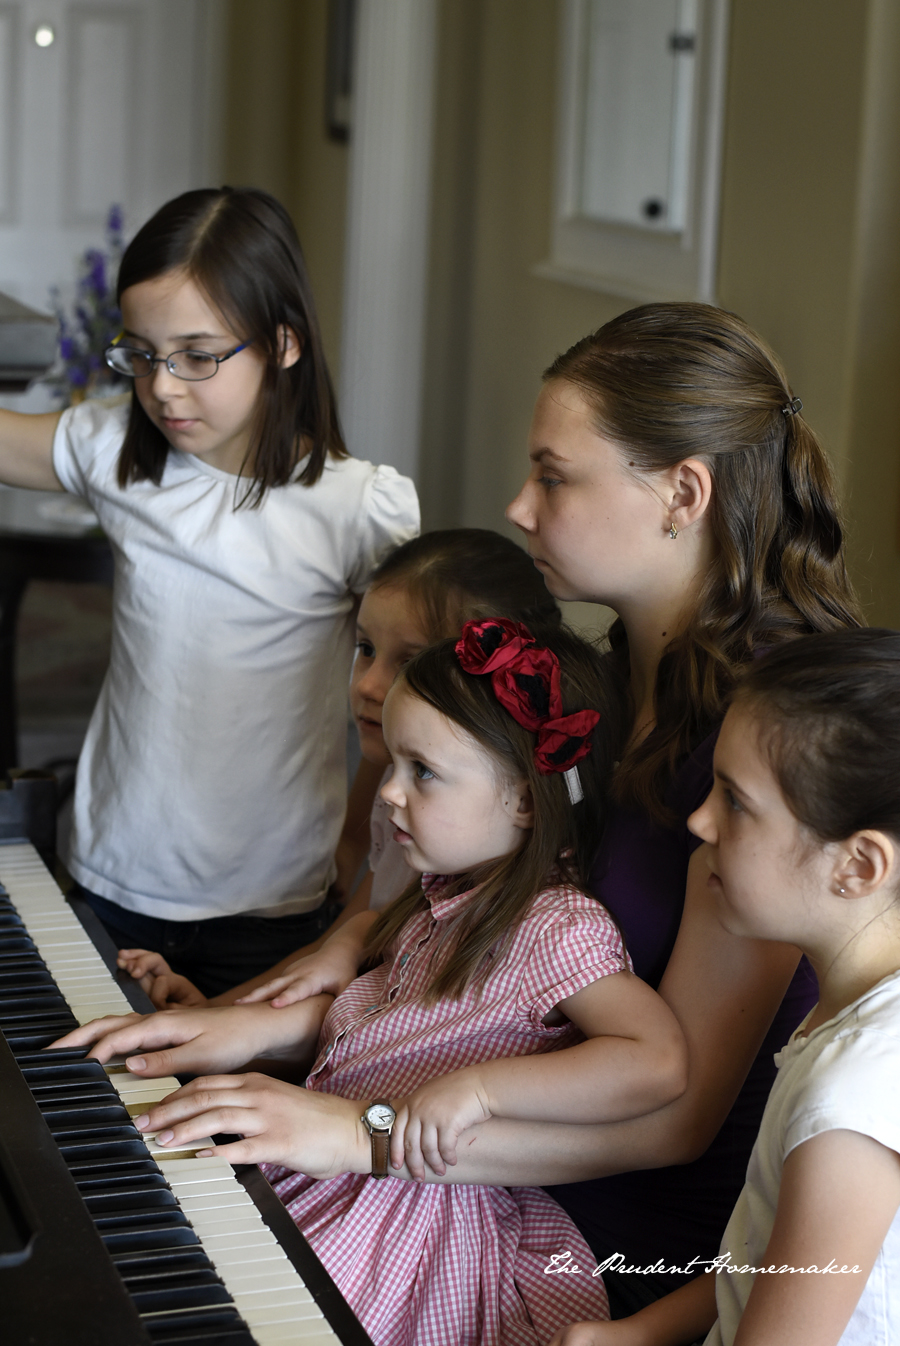 Girls at the Piano The Prudent Homemaker